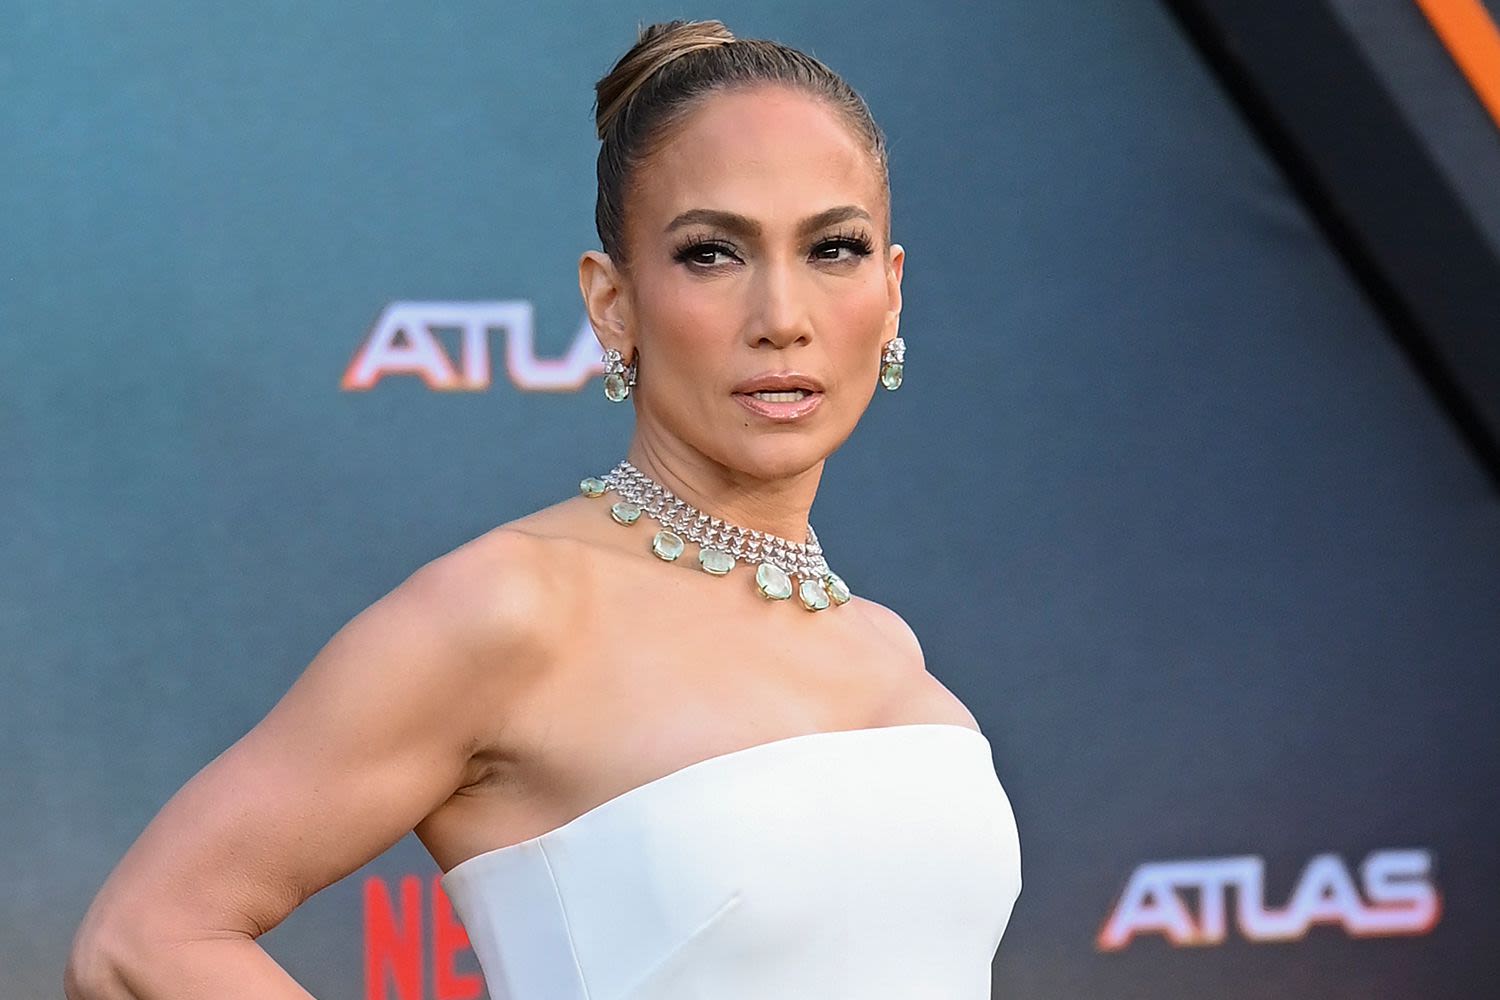 Jennifer Lopez Bares Arms in Black and White Sleeveless Look at Premiere of Netflix Action Flick Atlas